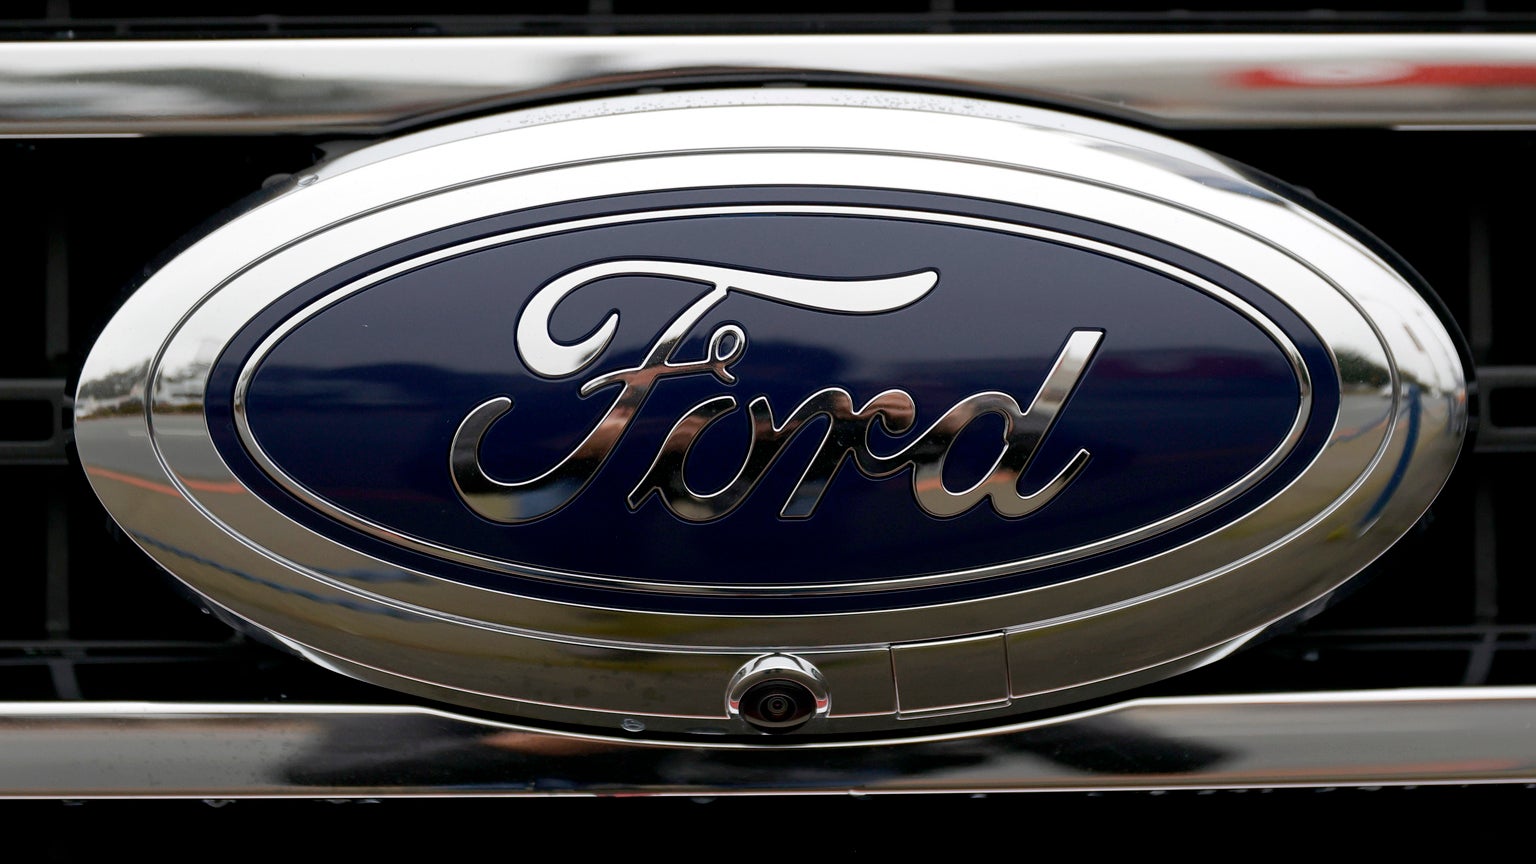 Ford's junk bonds fall along with stock after weak earnings and